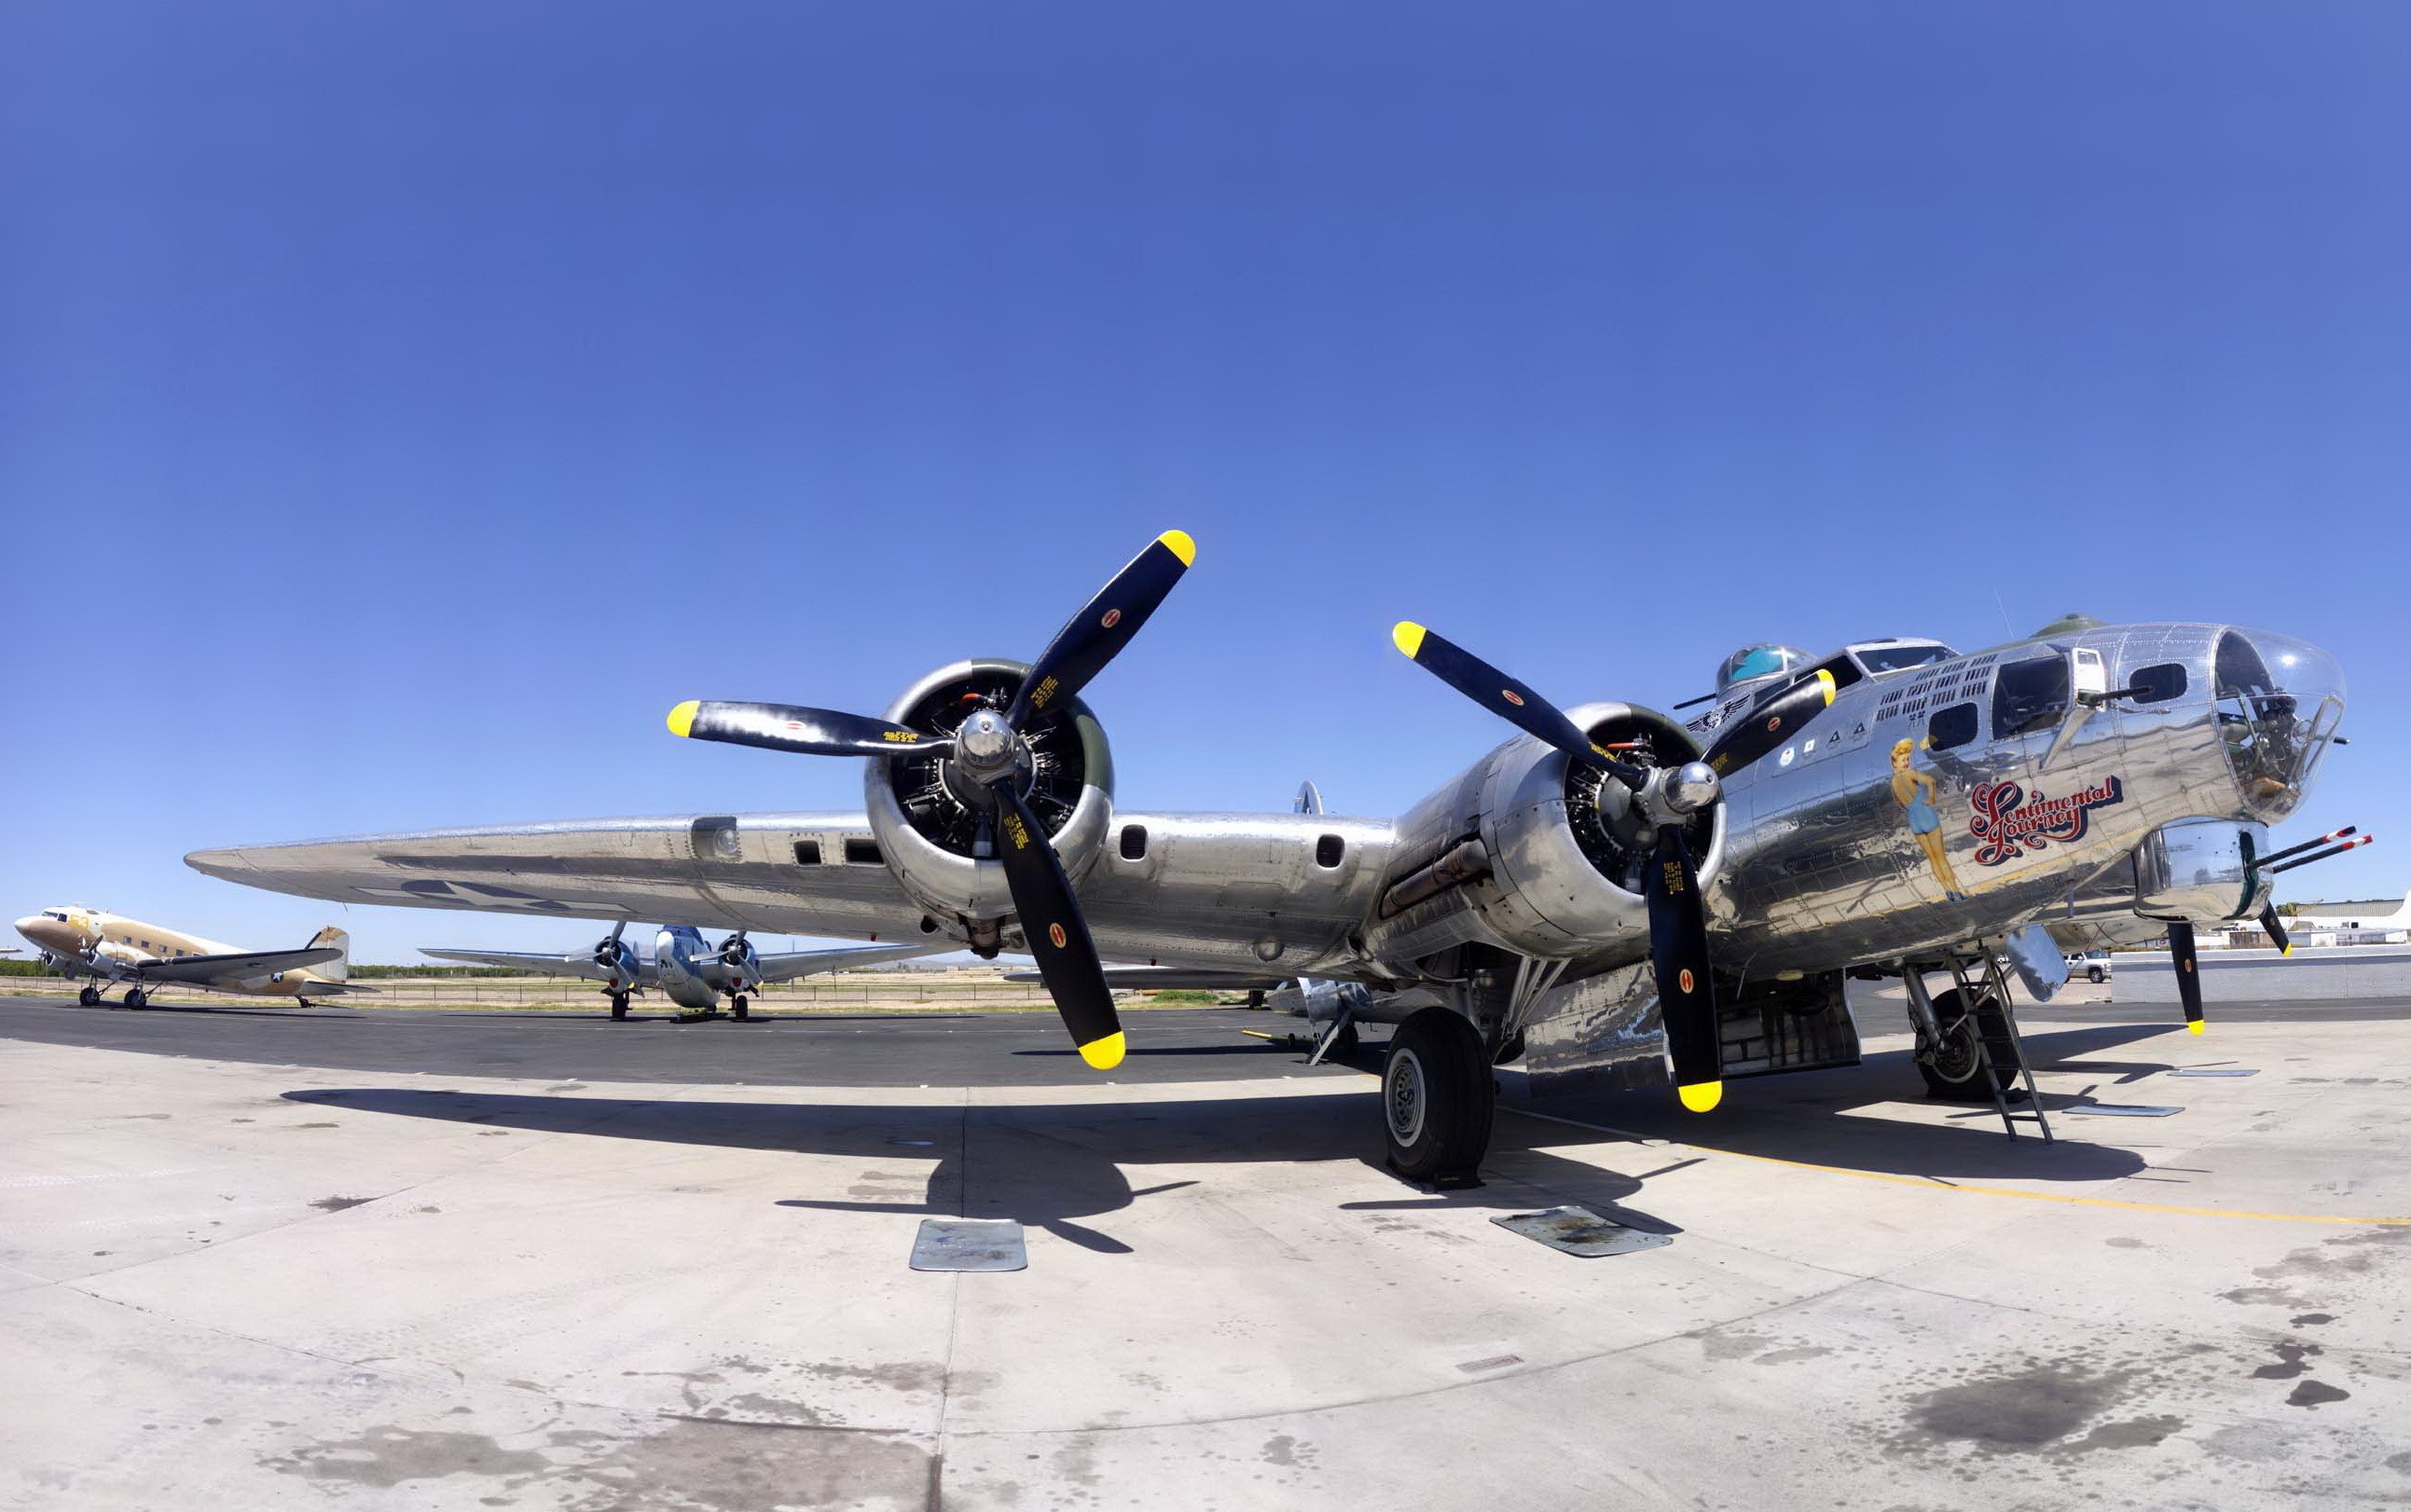 General 2586x1622 military aircraft Boeing B-17 Flying Fortress military aircraft vehicle military vehicle Boeing American aircraft Bomber sunlight frontal view